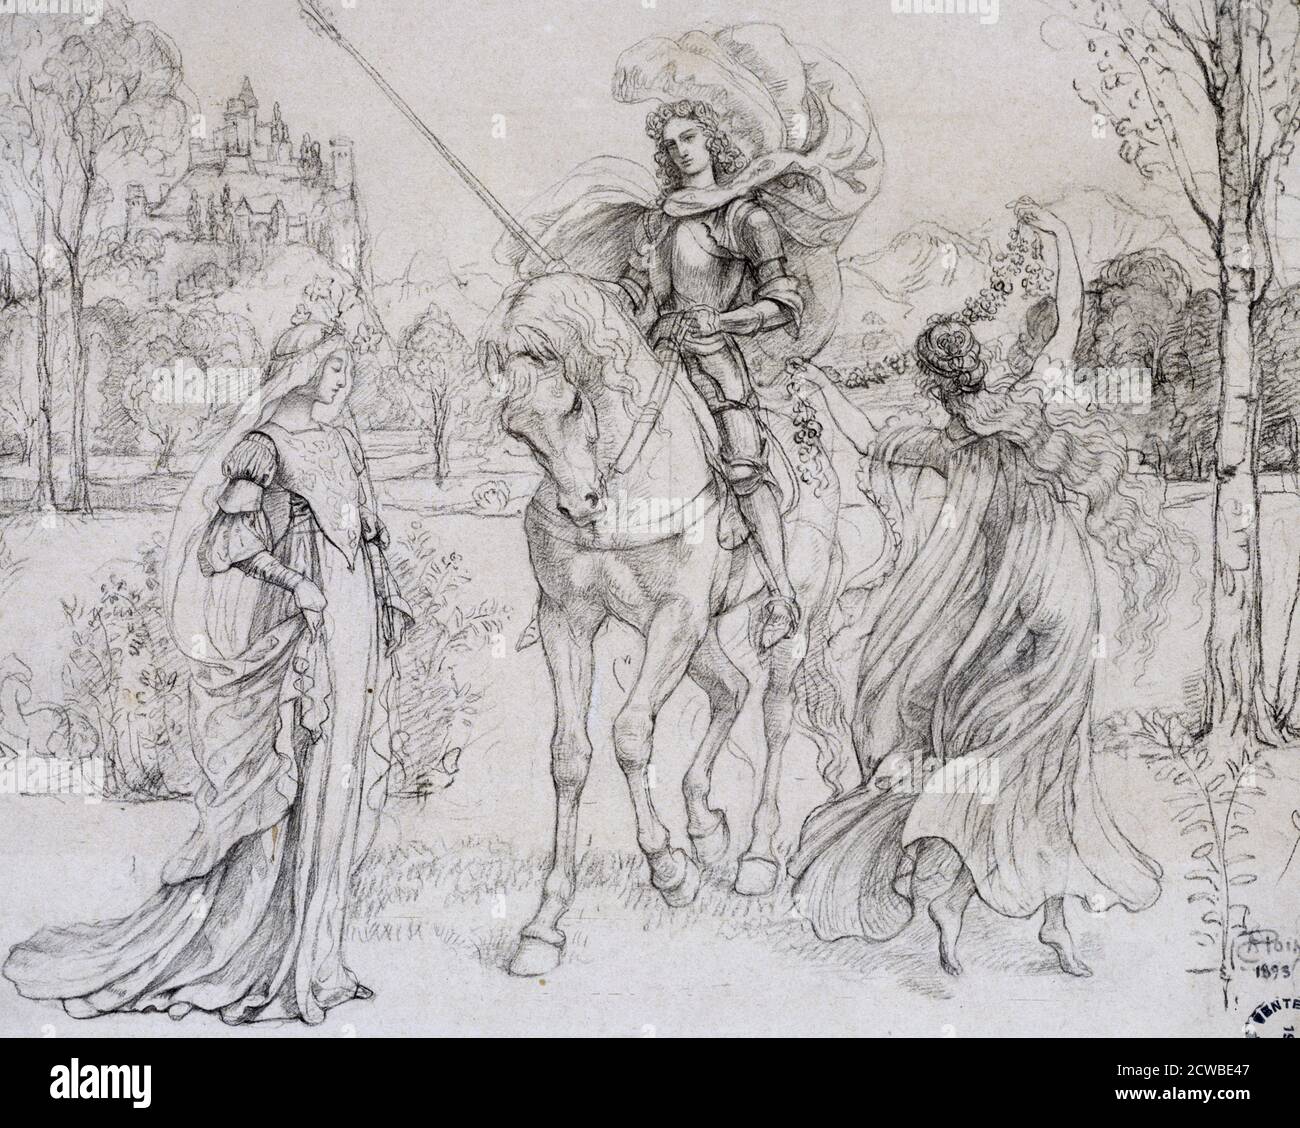 Greeting the Knight', c1880-1932. Artist: Armand Point. Armand Point(1861-1932) was a French painter, engraver and designer who was associated with the Symbolist movement. Stock Photo